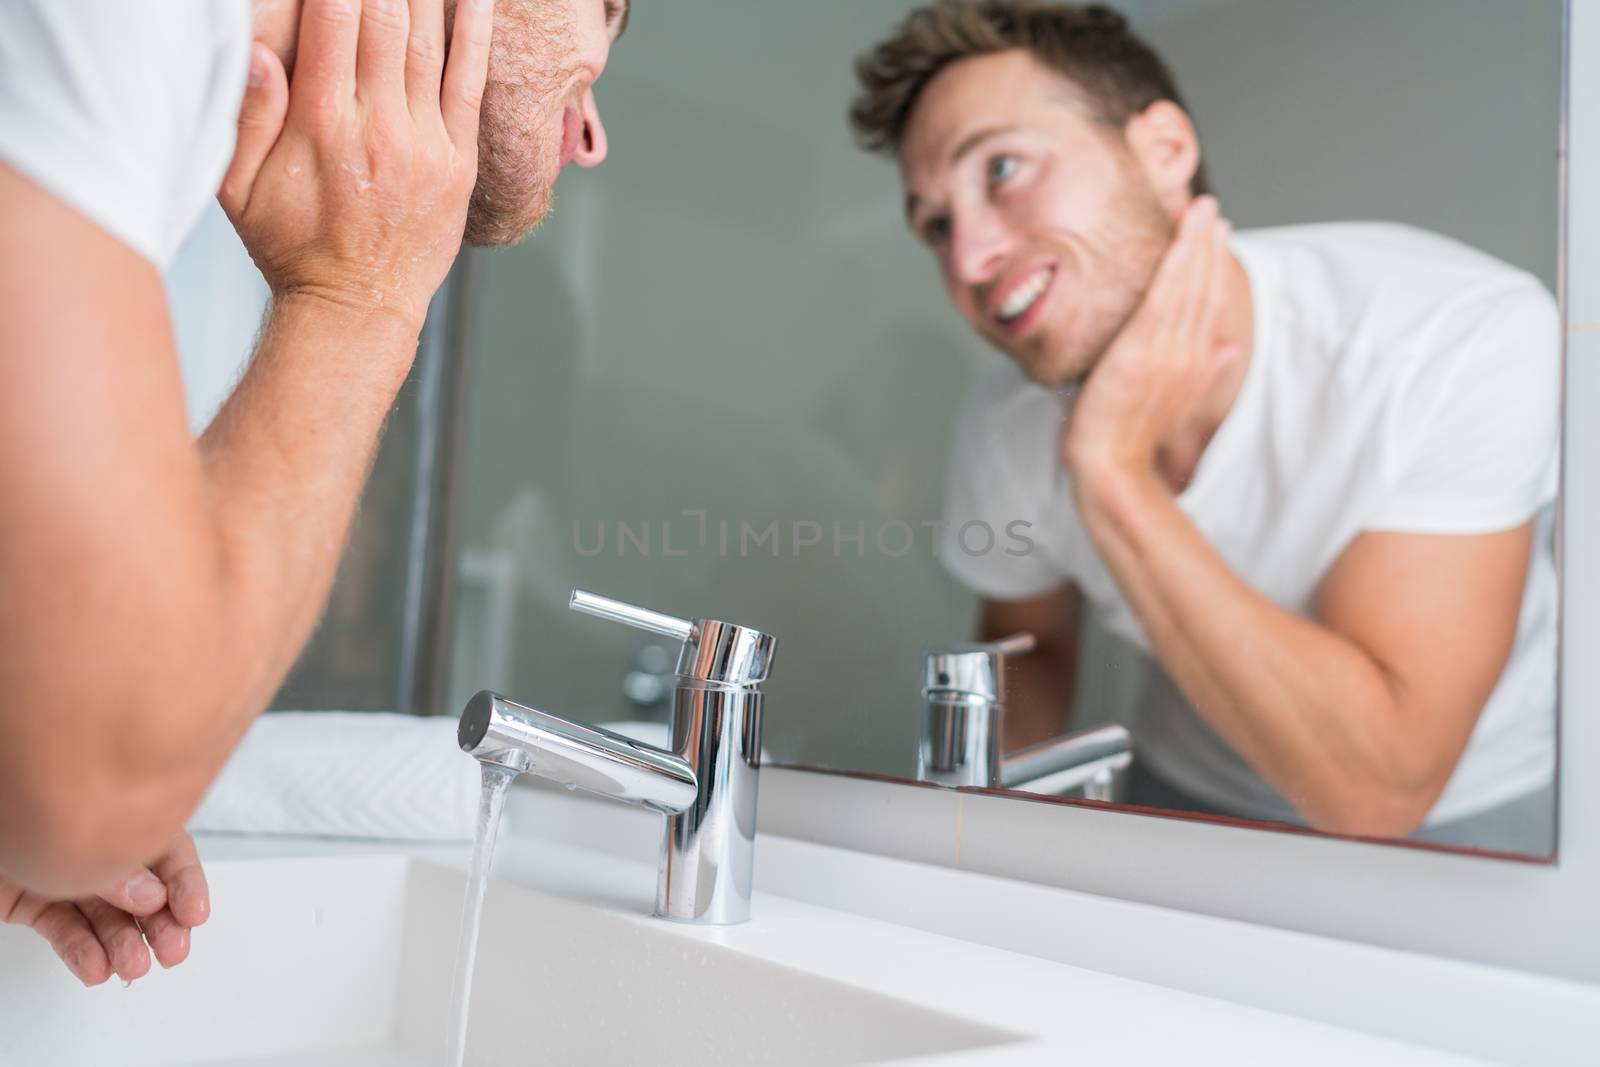 Man washing face in sink in bathroom rinsing after shaving. Home lifestyle copyspace.